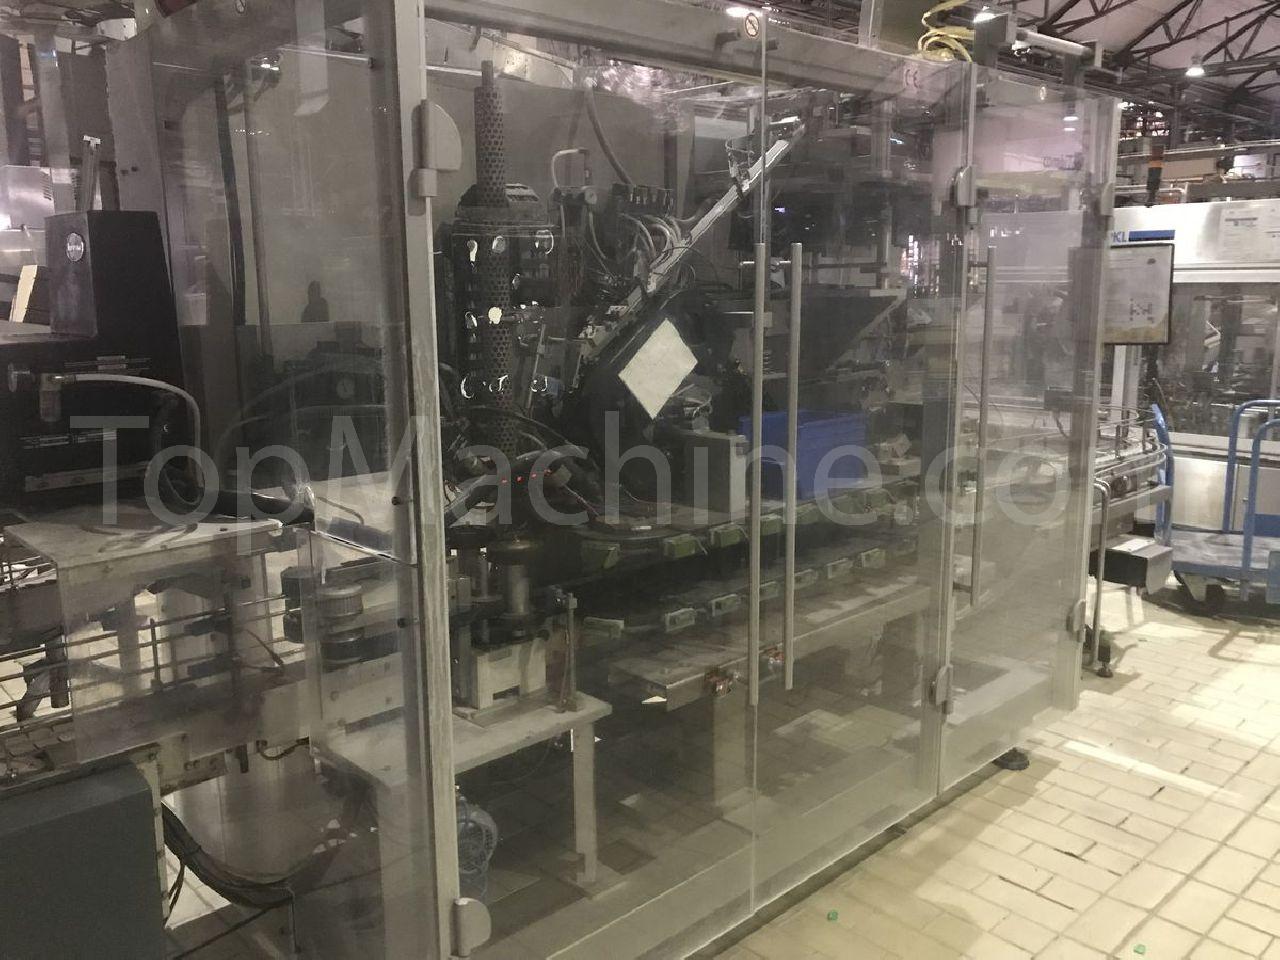 Used SIG Combibloc CFA 310-31 Dairy & Juices Aseptic filling